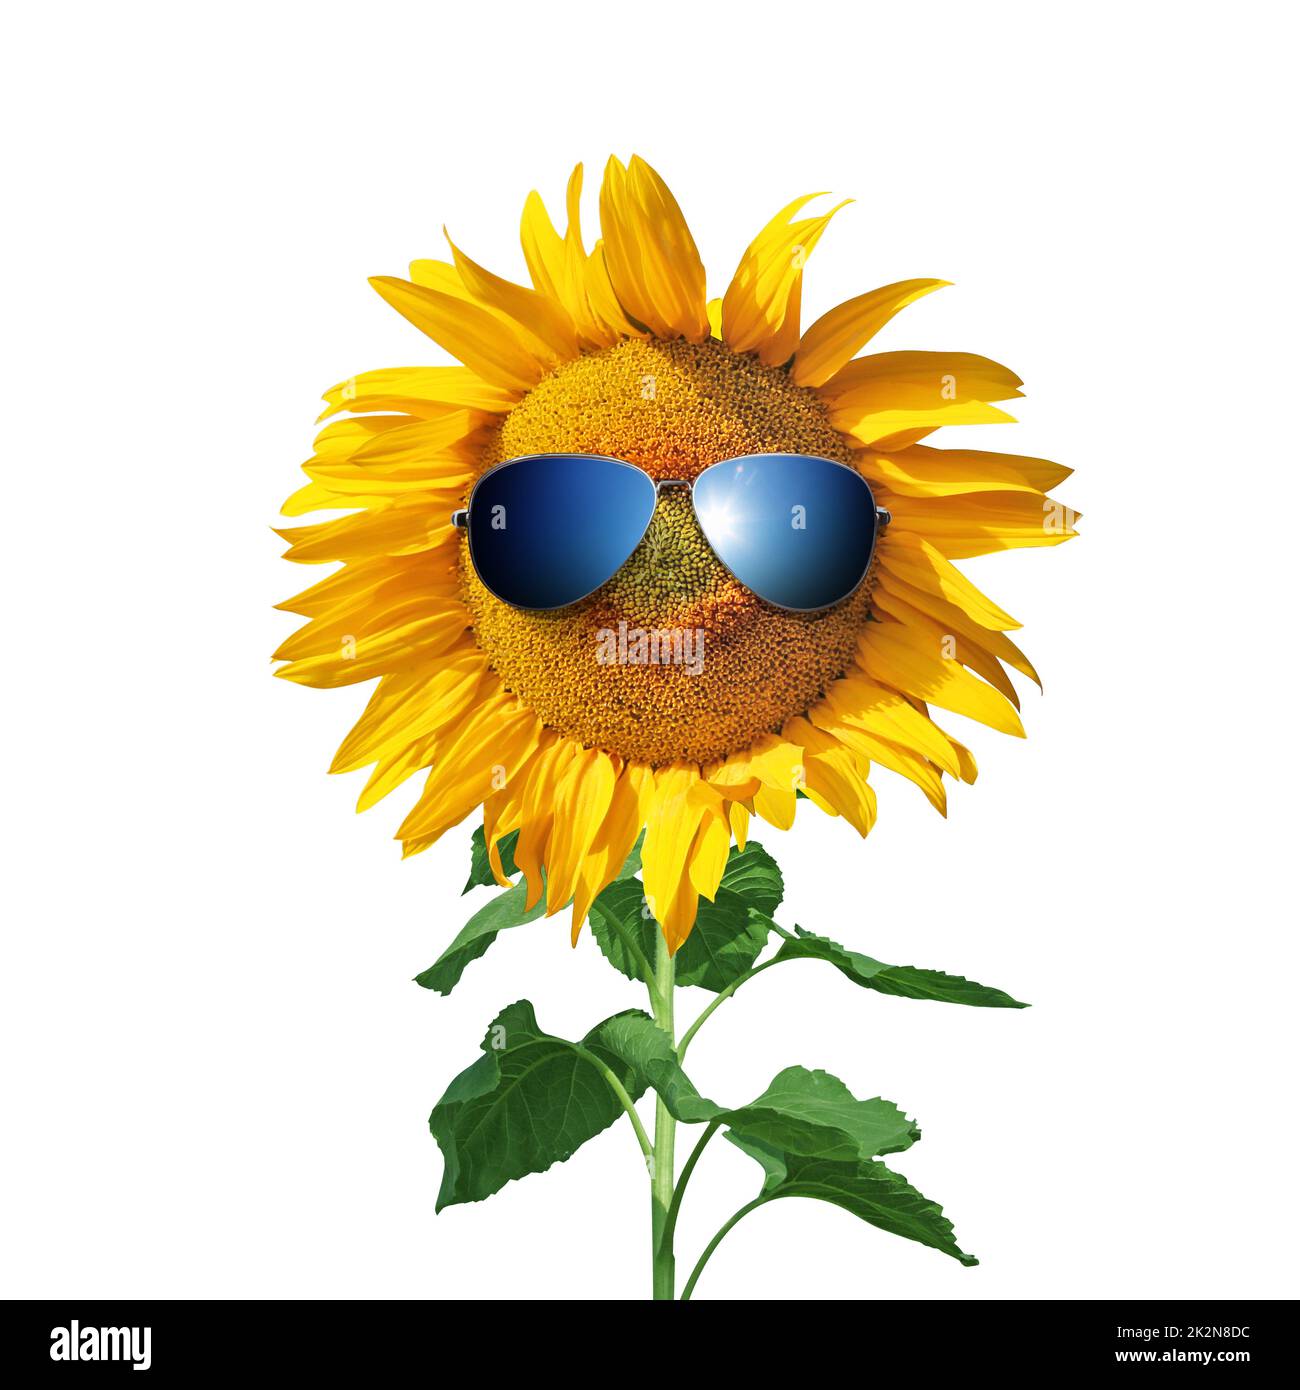 Funny sunflower with sunglasses on a white background Stock Photo